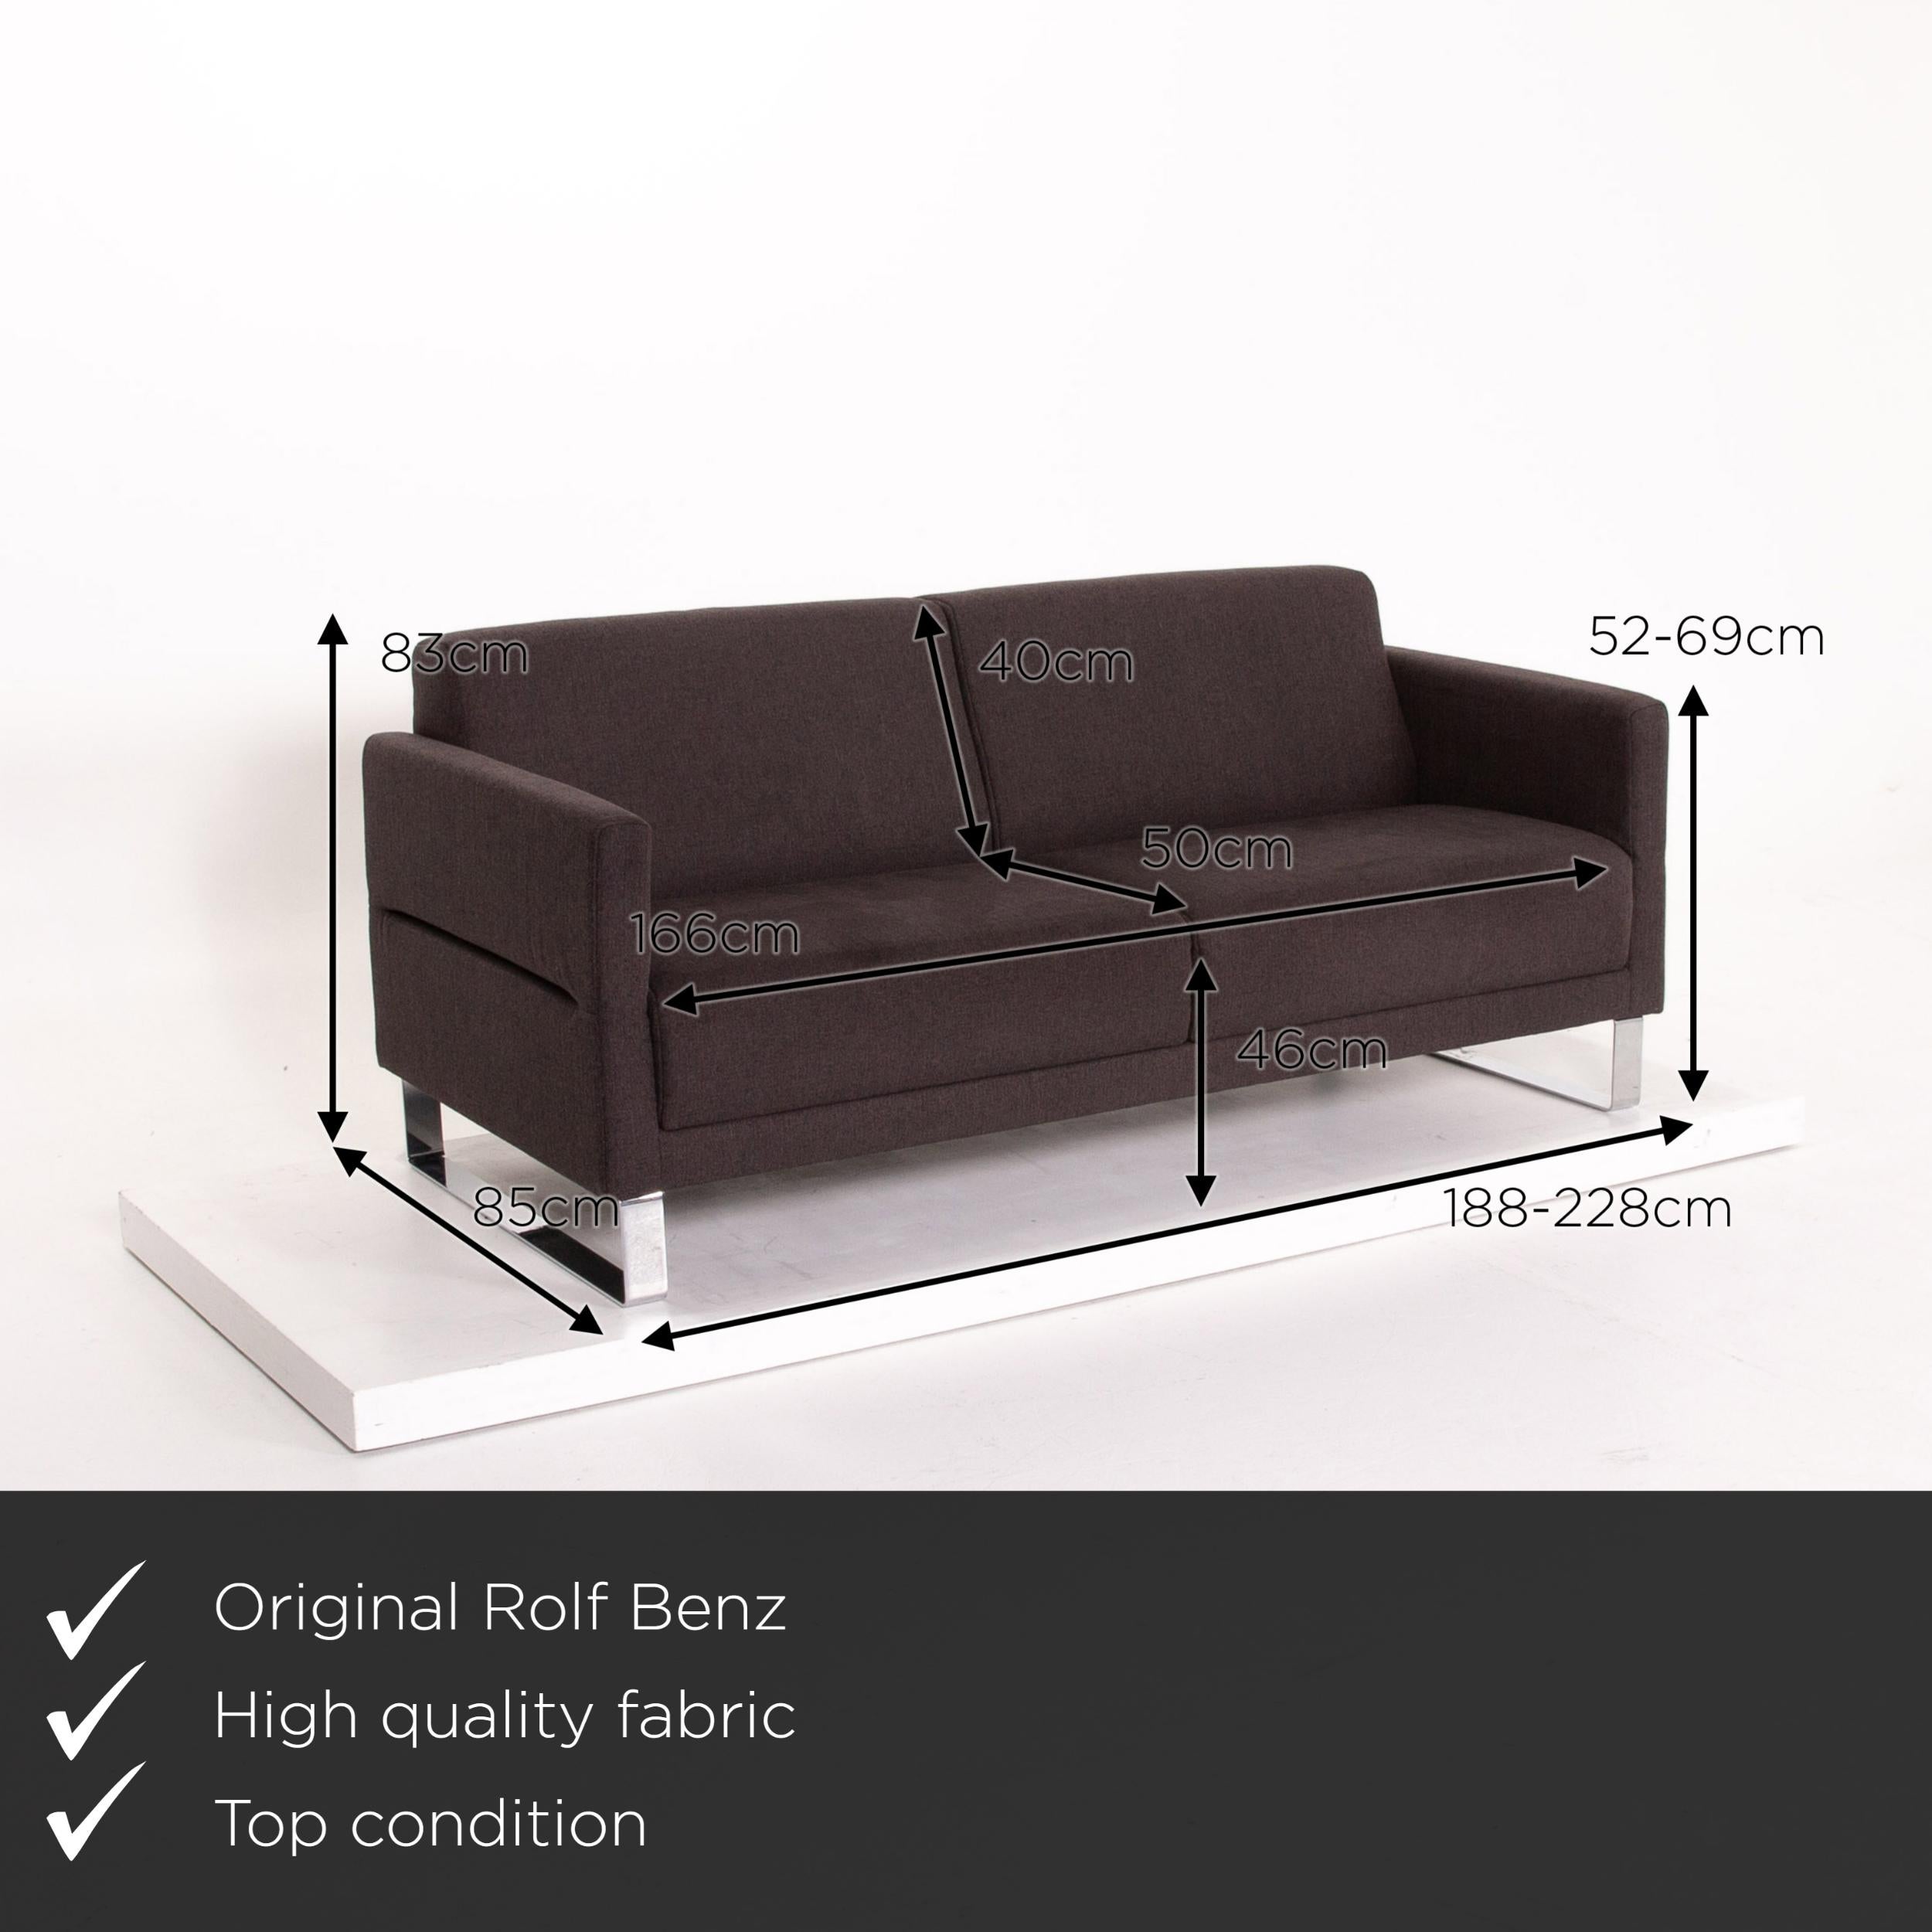 We present to you a Rolf Benz fabric sofa anthracite gray two-seat couch.
   
 

 Product measurements in centimeters:
 

Depth 85
Width 188
Height 83
Seat height 46
Rest height 52
Seat depth 50
Seat width 166
Back height 40.
  